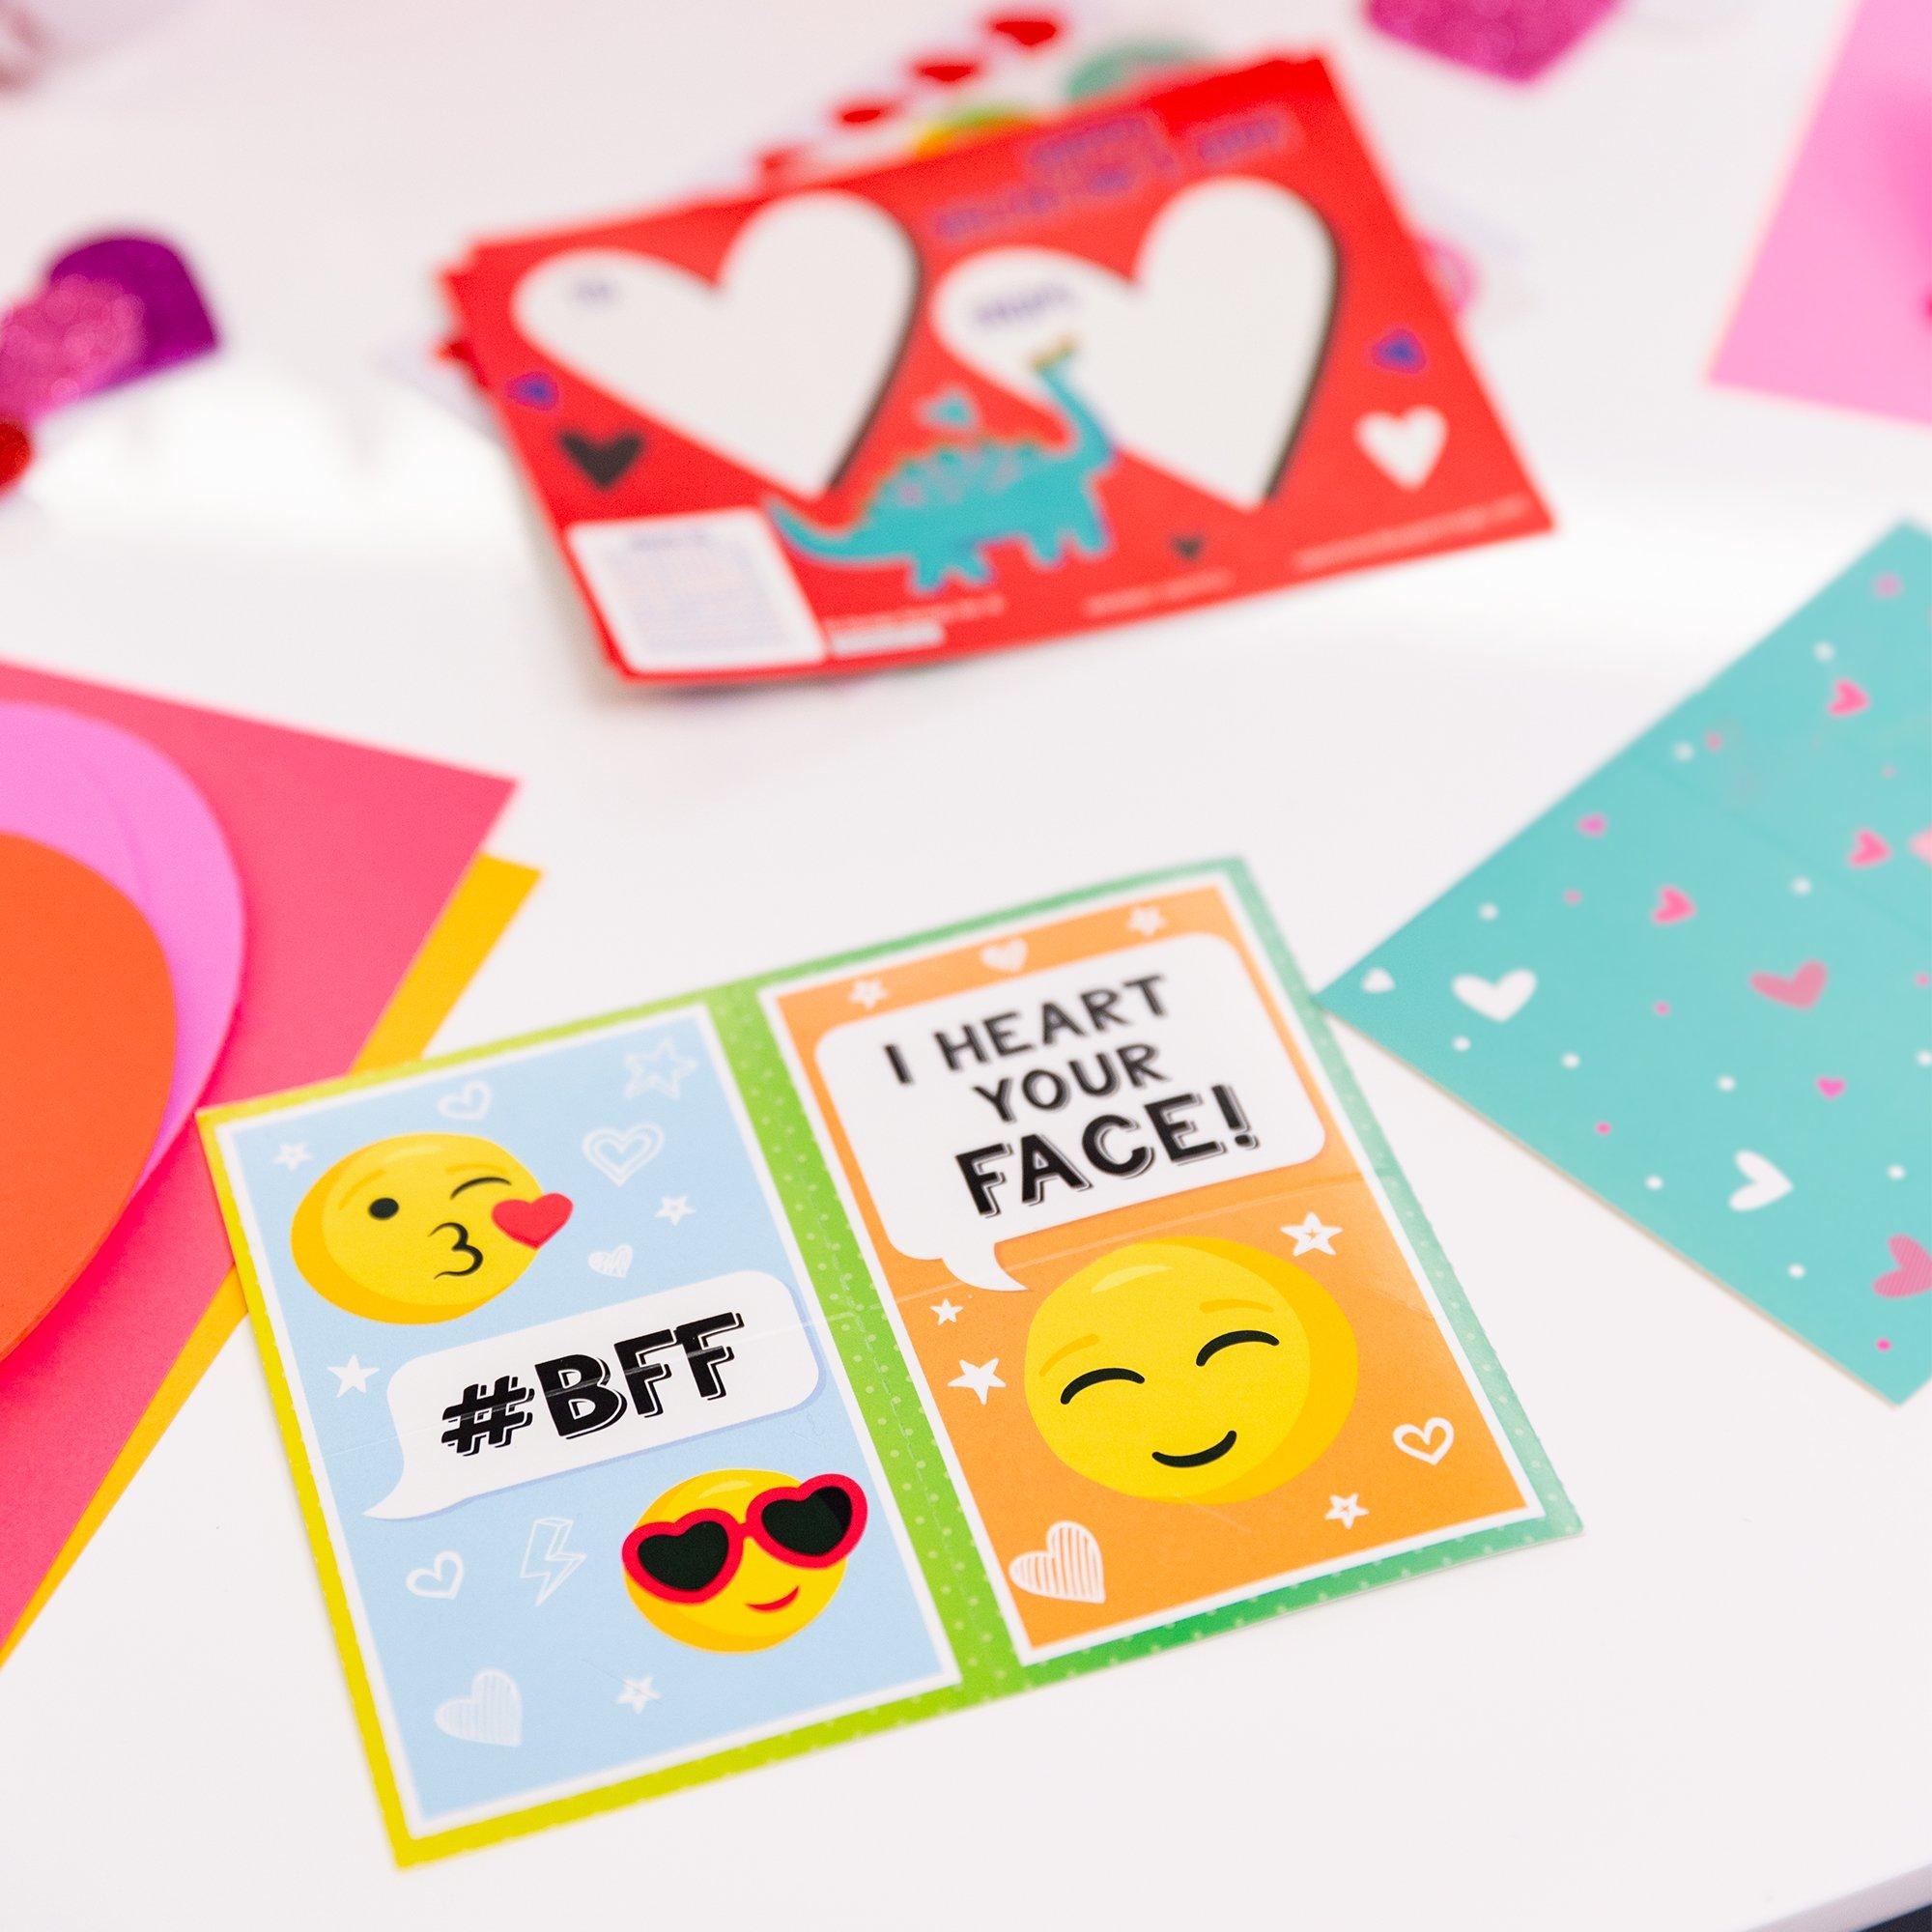 Funny Face Valentine's Day Exchange Cards with Tattoos, 32ct